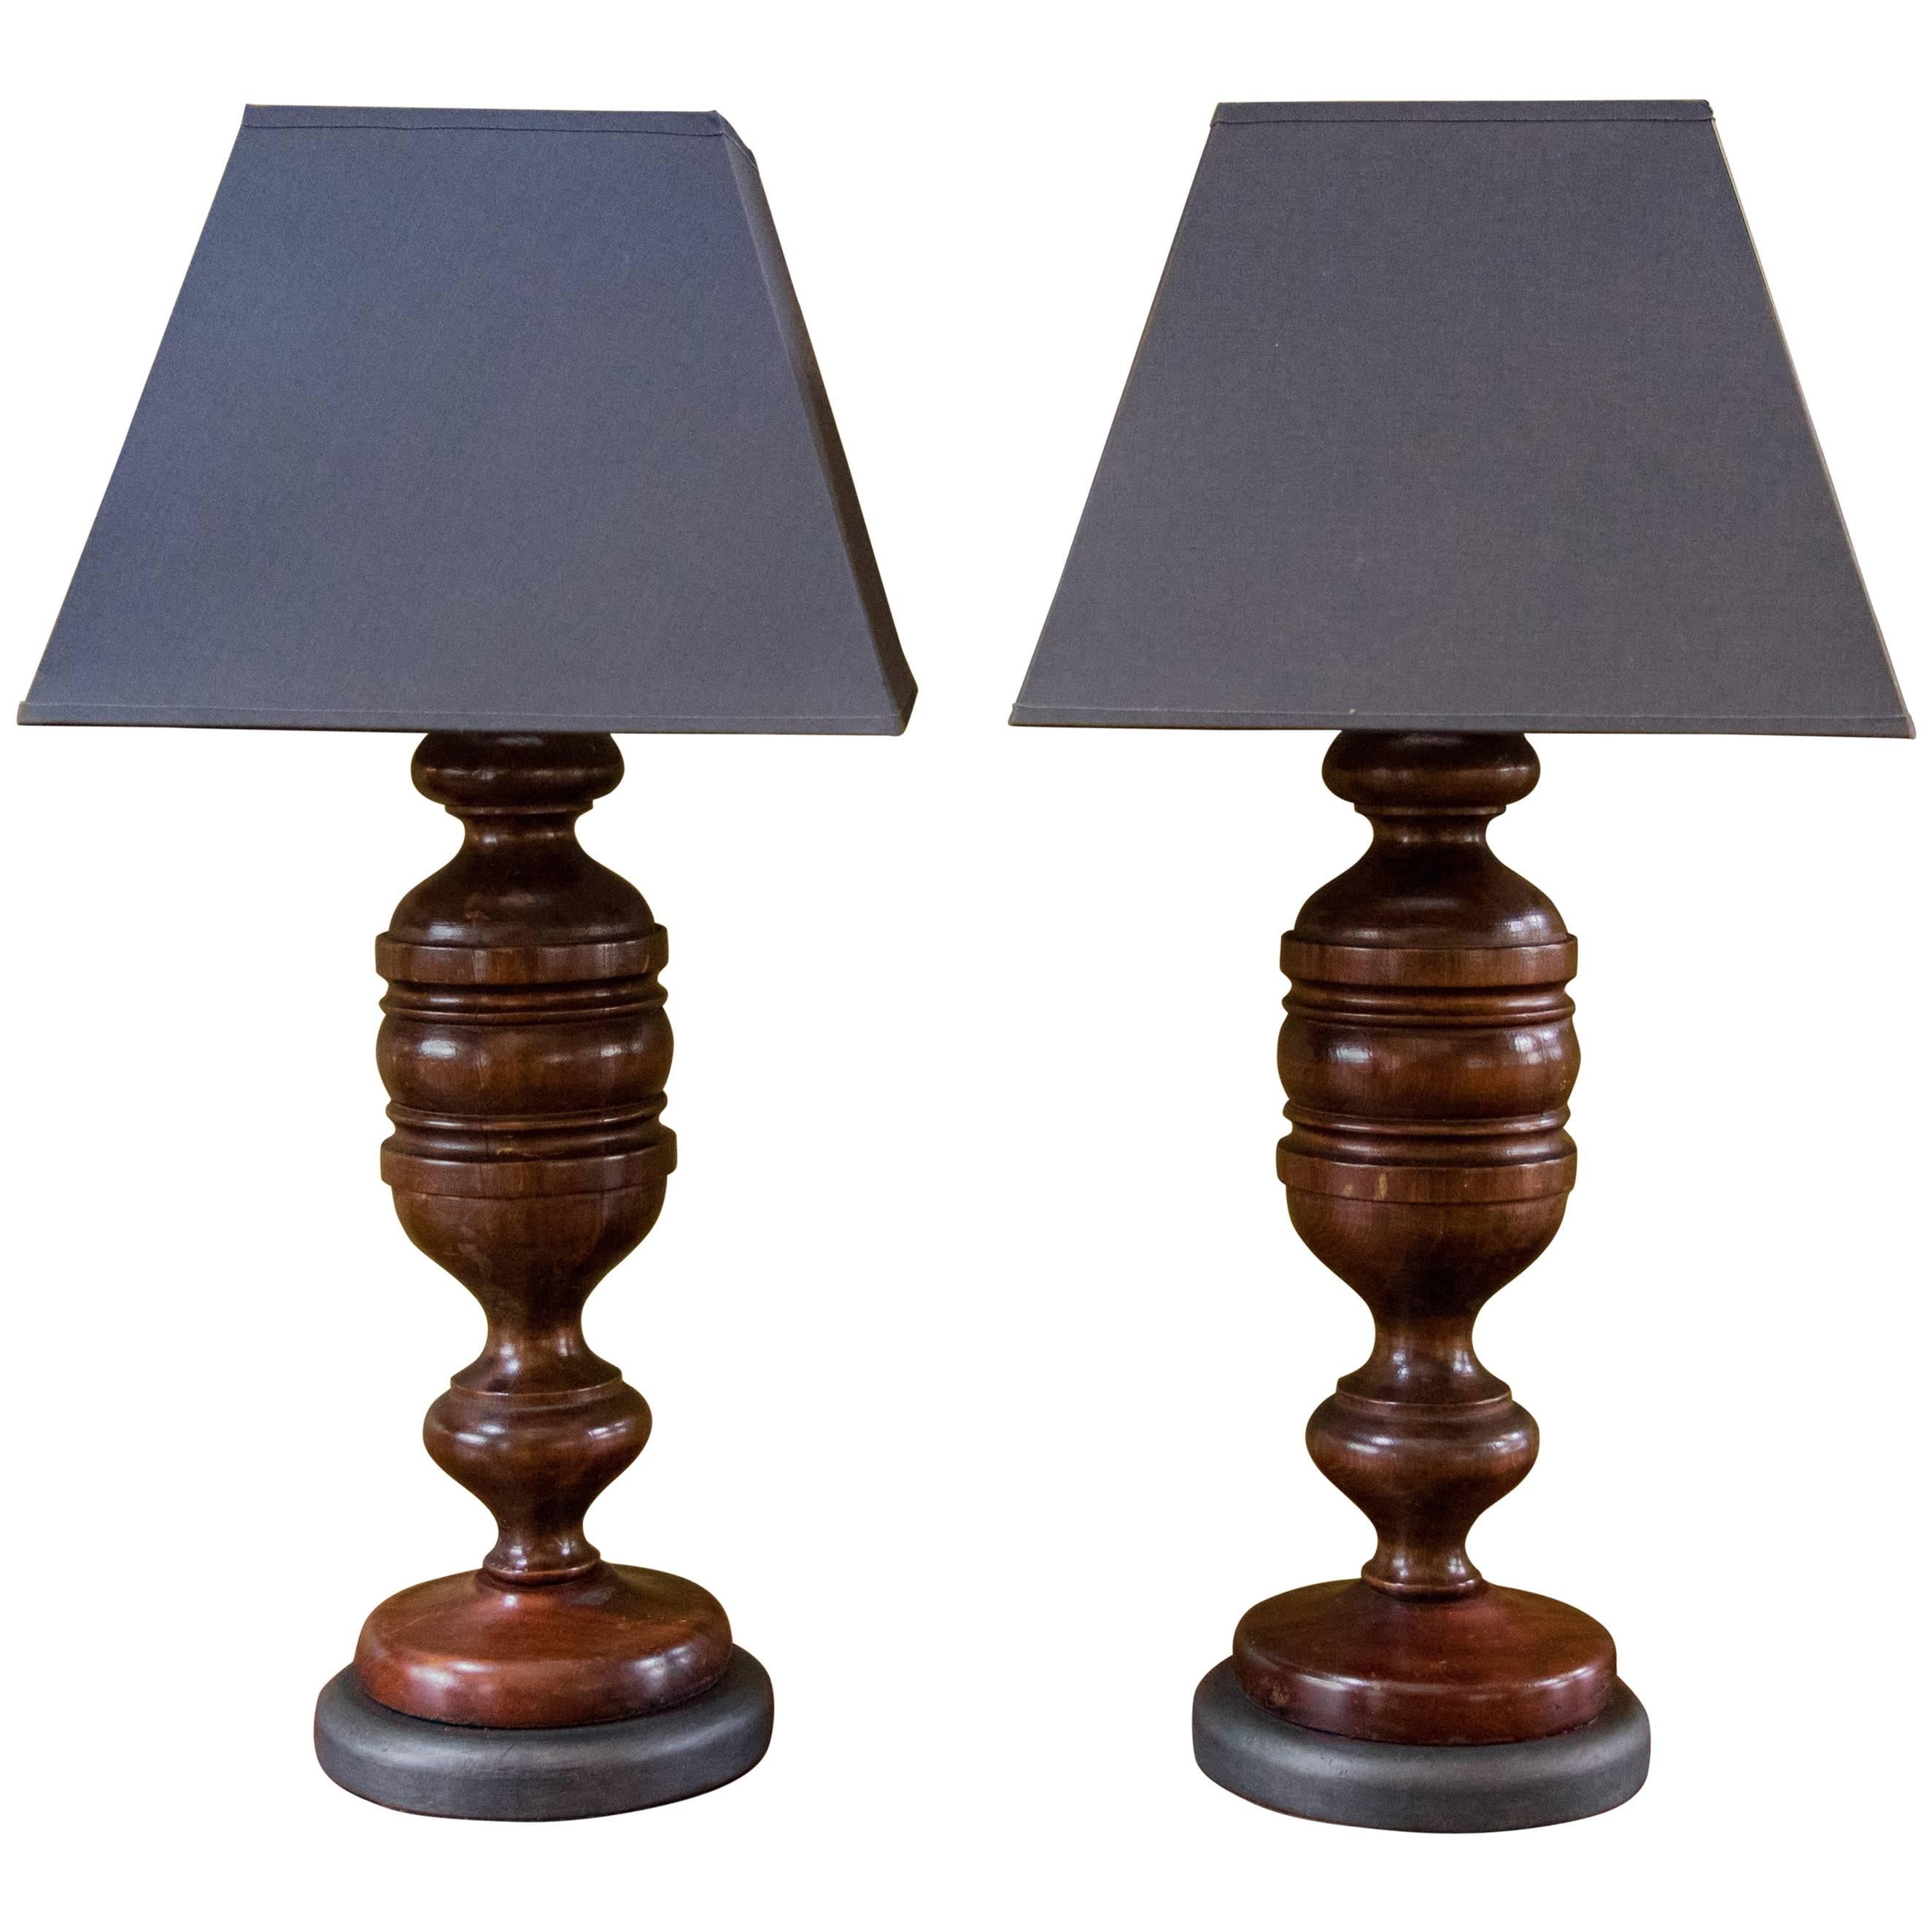 Pair Carved Mahogany Table Lamps with Custom Belgian Linen Shades, Circa 1920